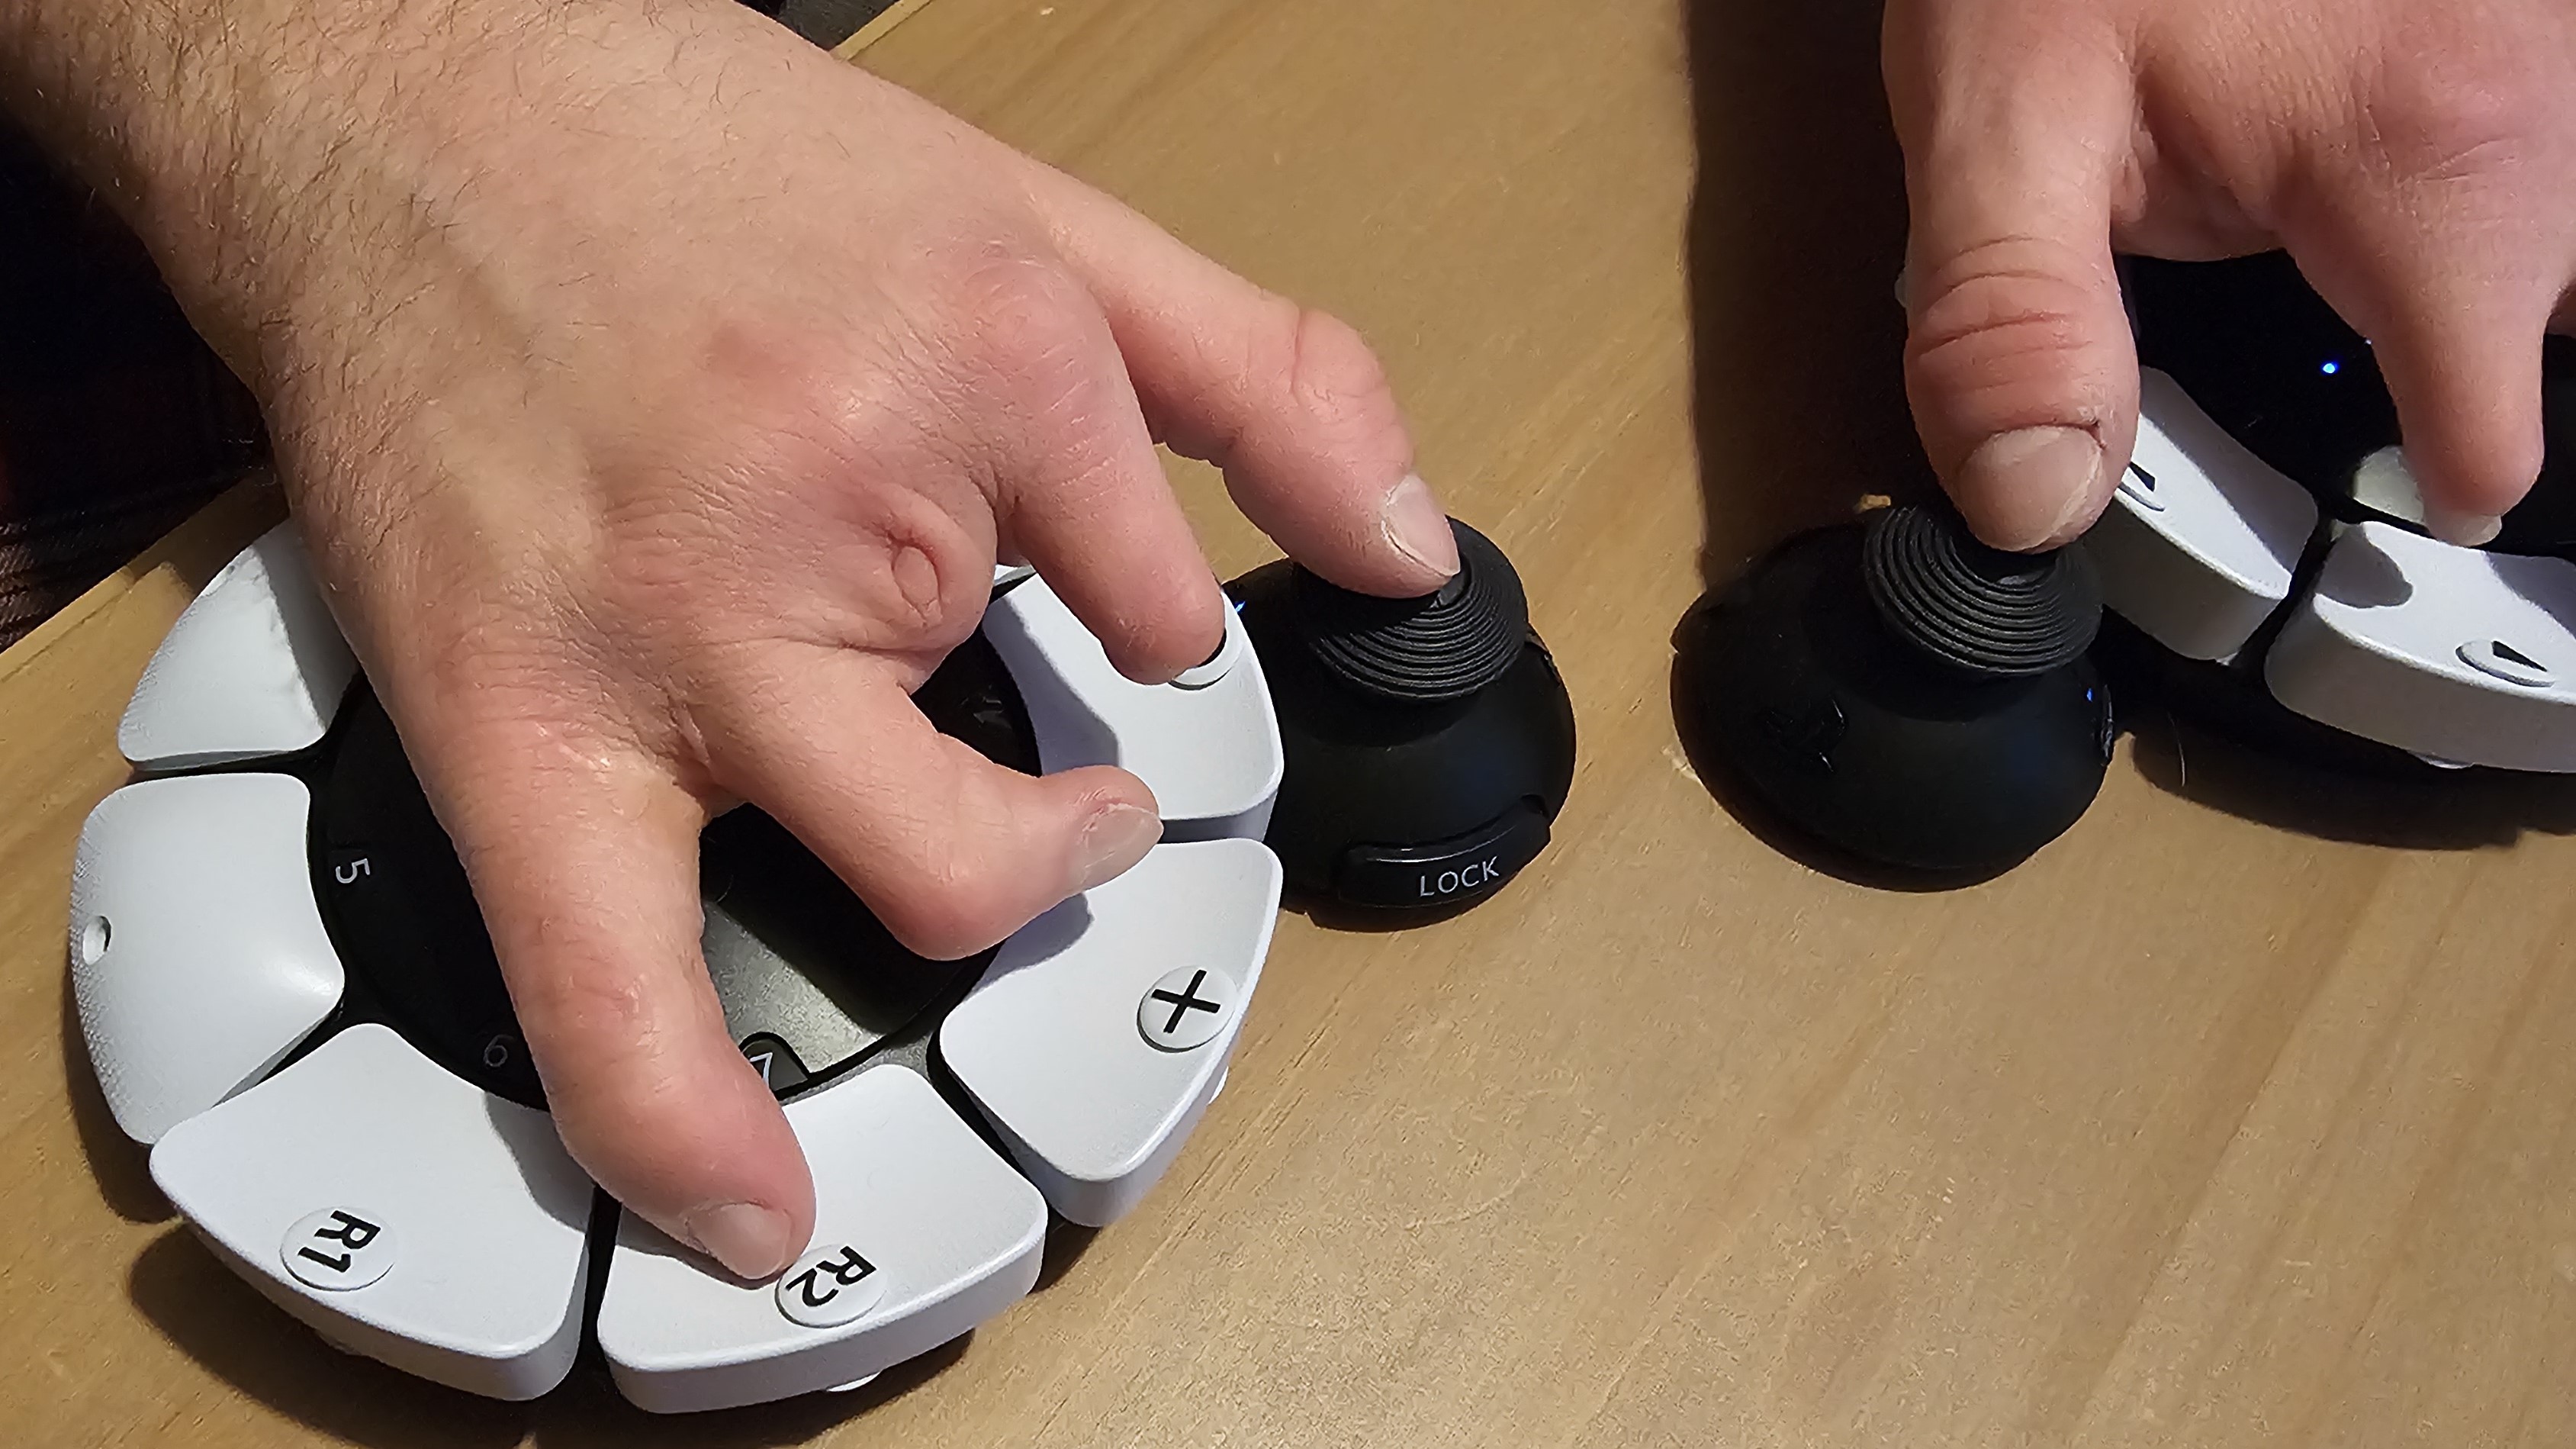 The PlayStation Access controller being used by someone with accessibility needs.